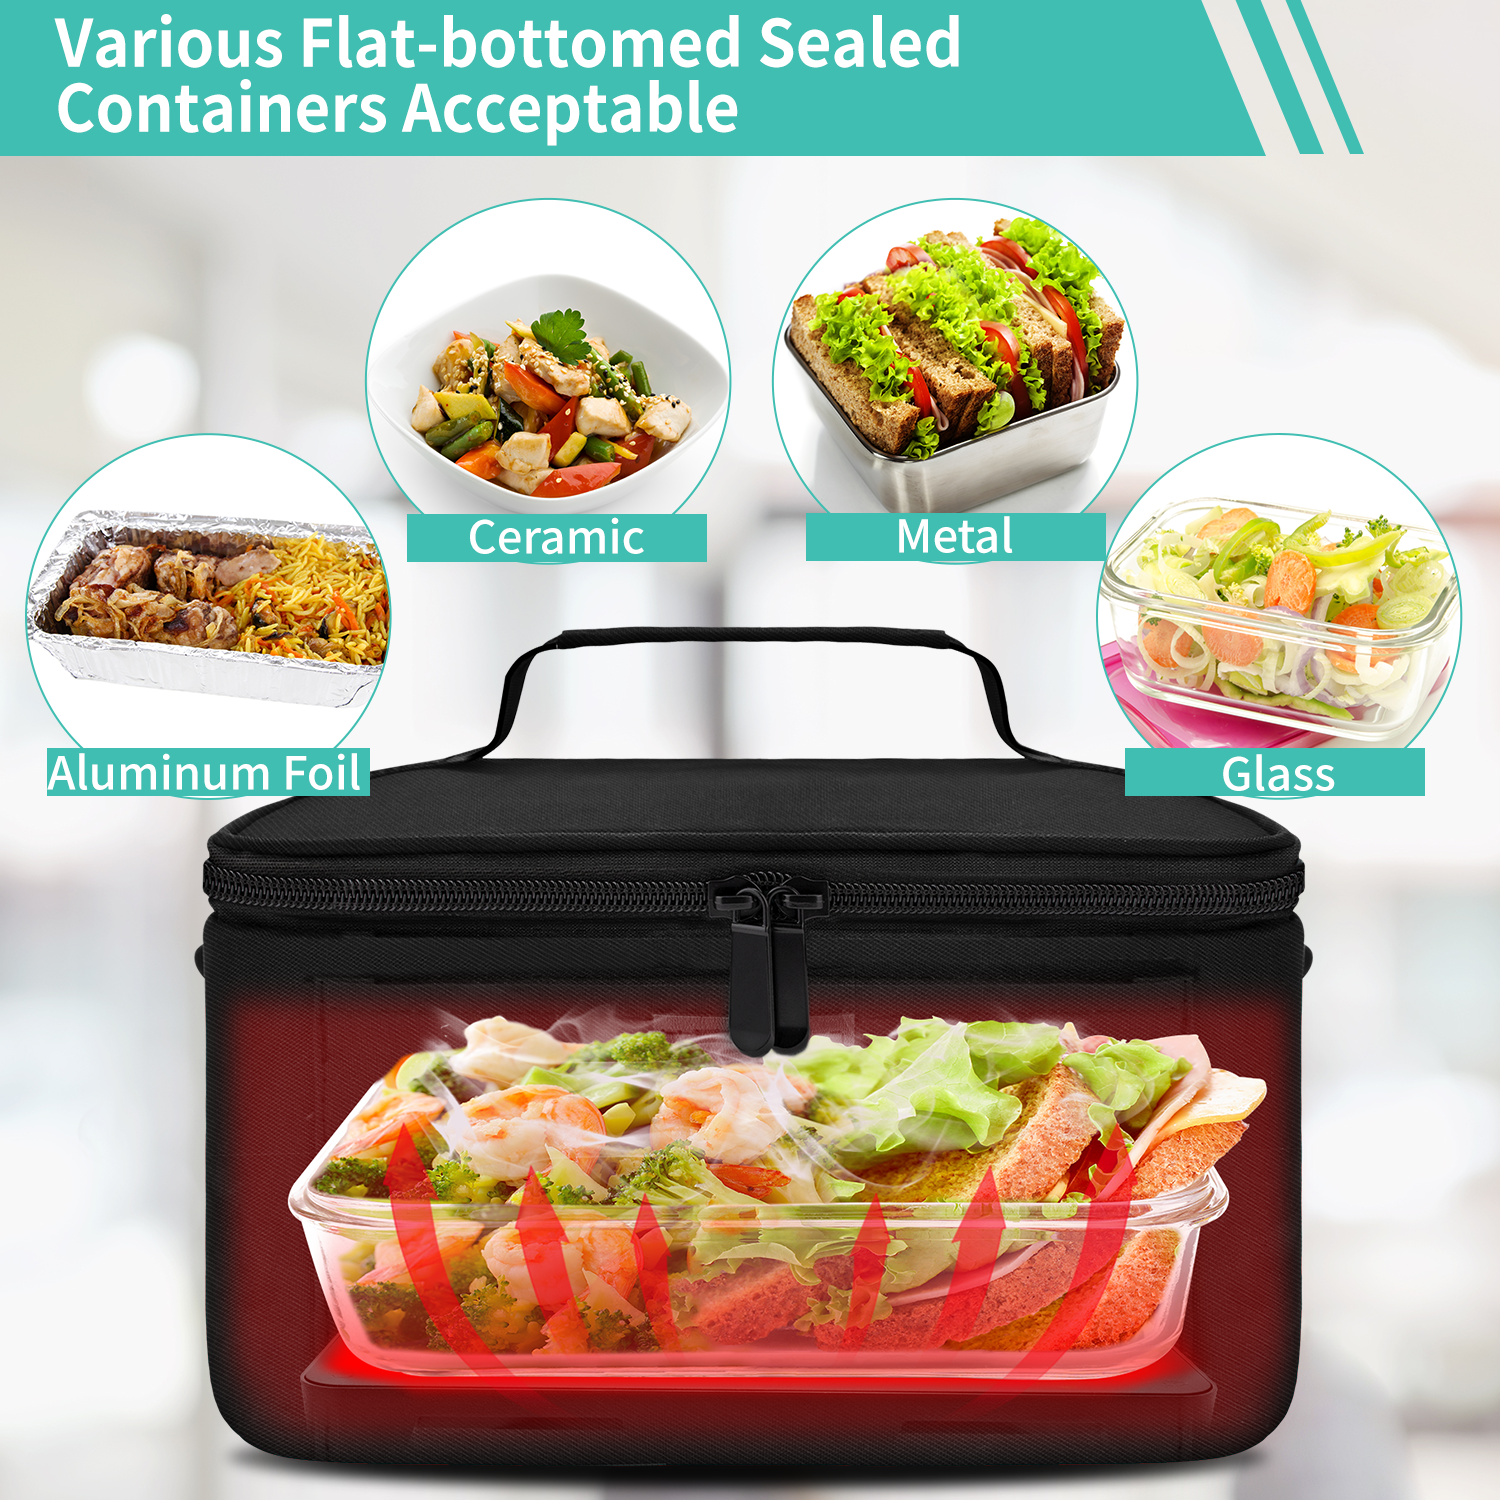 Personal Portable Oven Mini Food Warmer Electric Lunch Box with Warmer Bag New